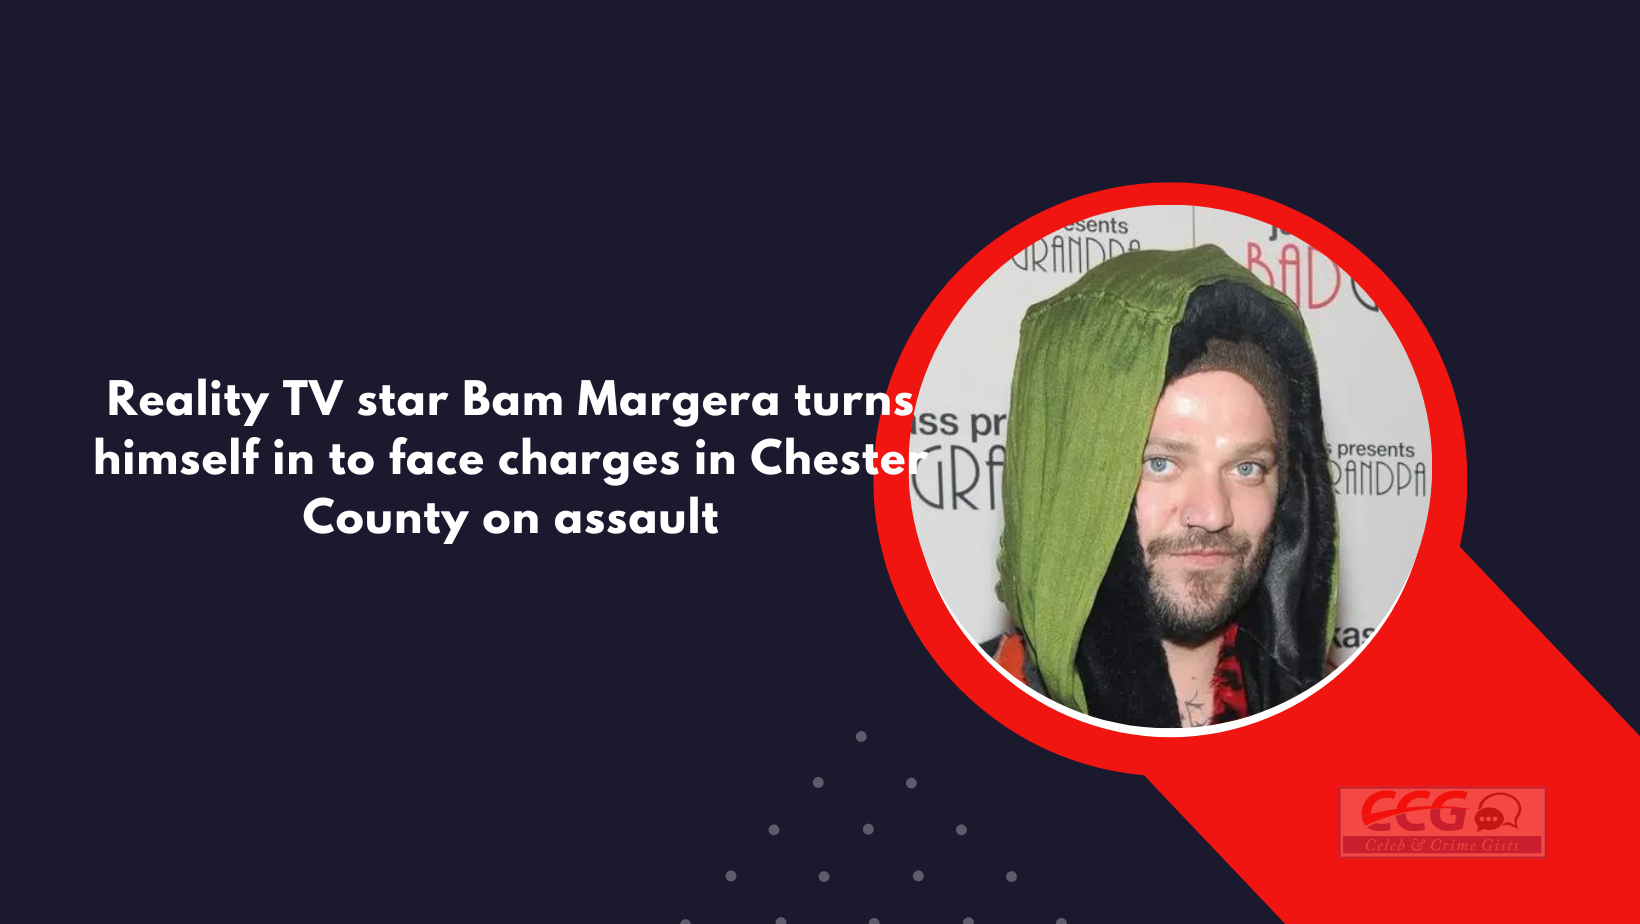 Reality TV star Bam Margera turns himself in to face charges in Chester County on assault